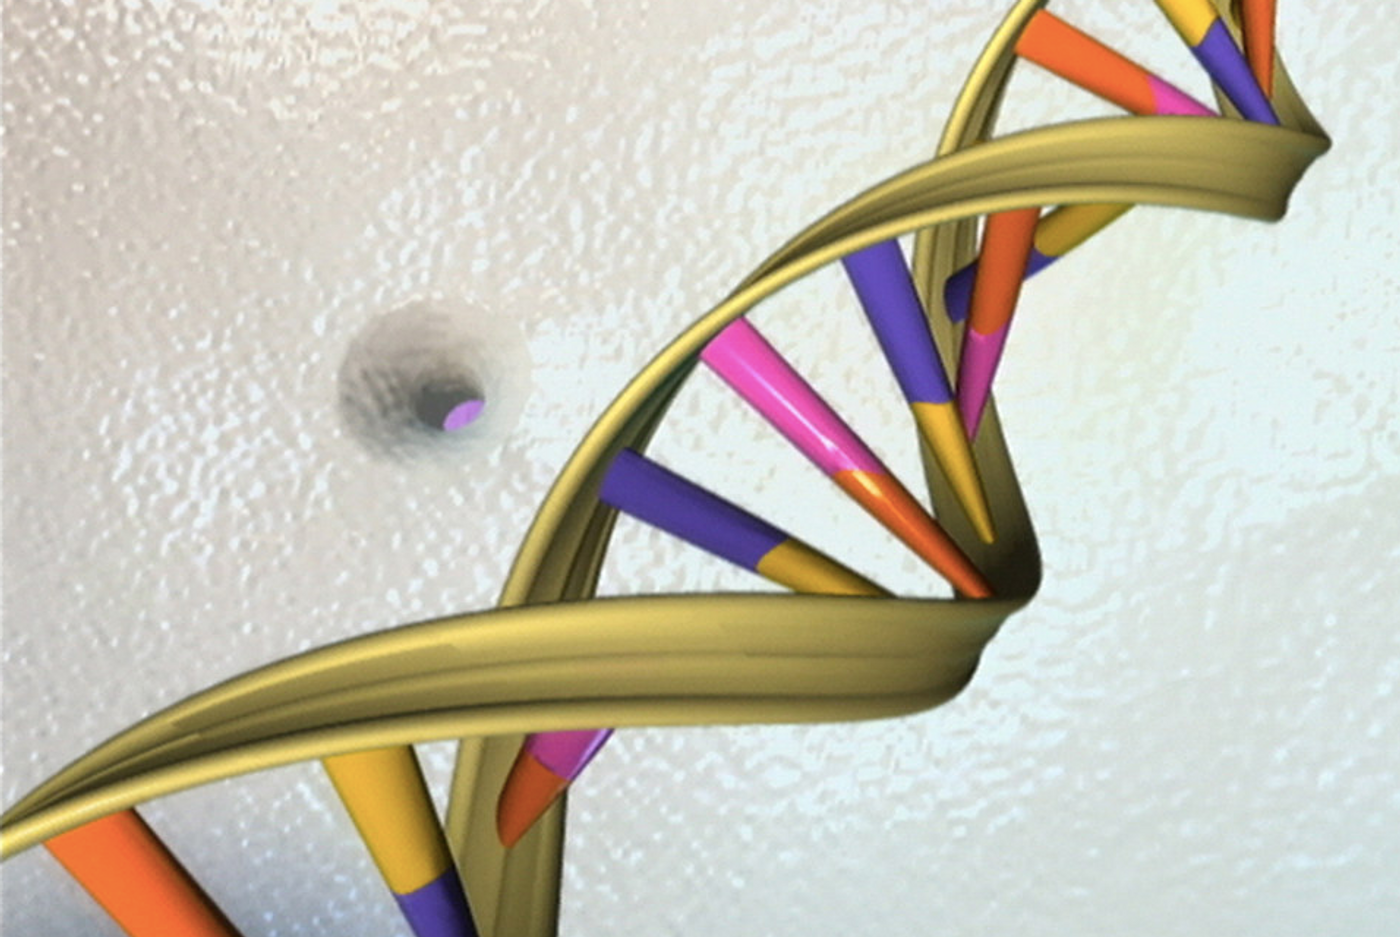 	 NIH Image Gallery DNA Double Helix / Credit: National Human Genome Research Institute, National Institutes of Health.